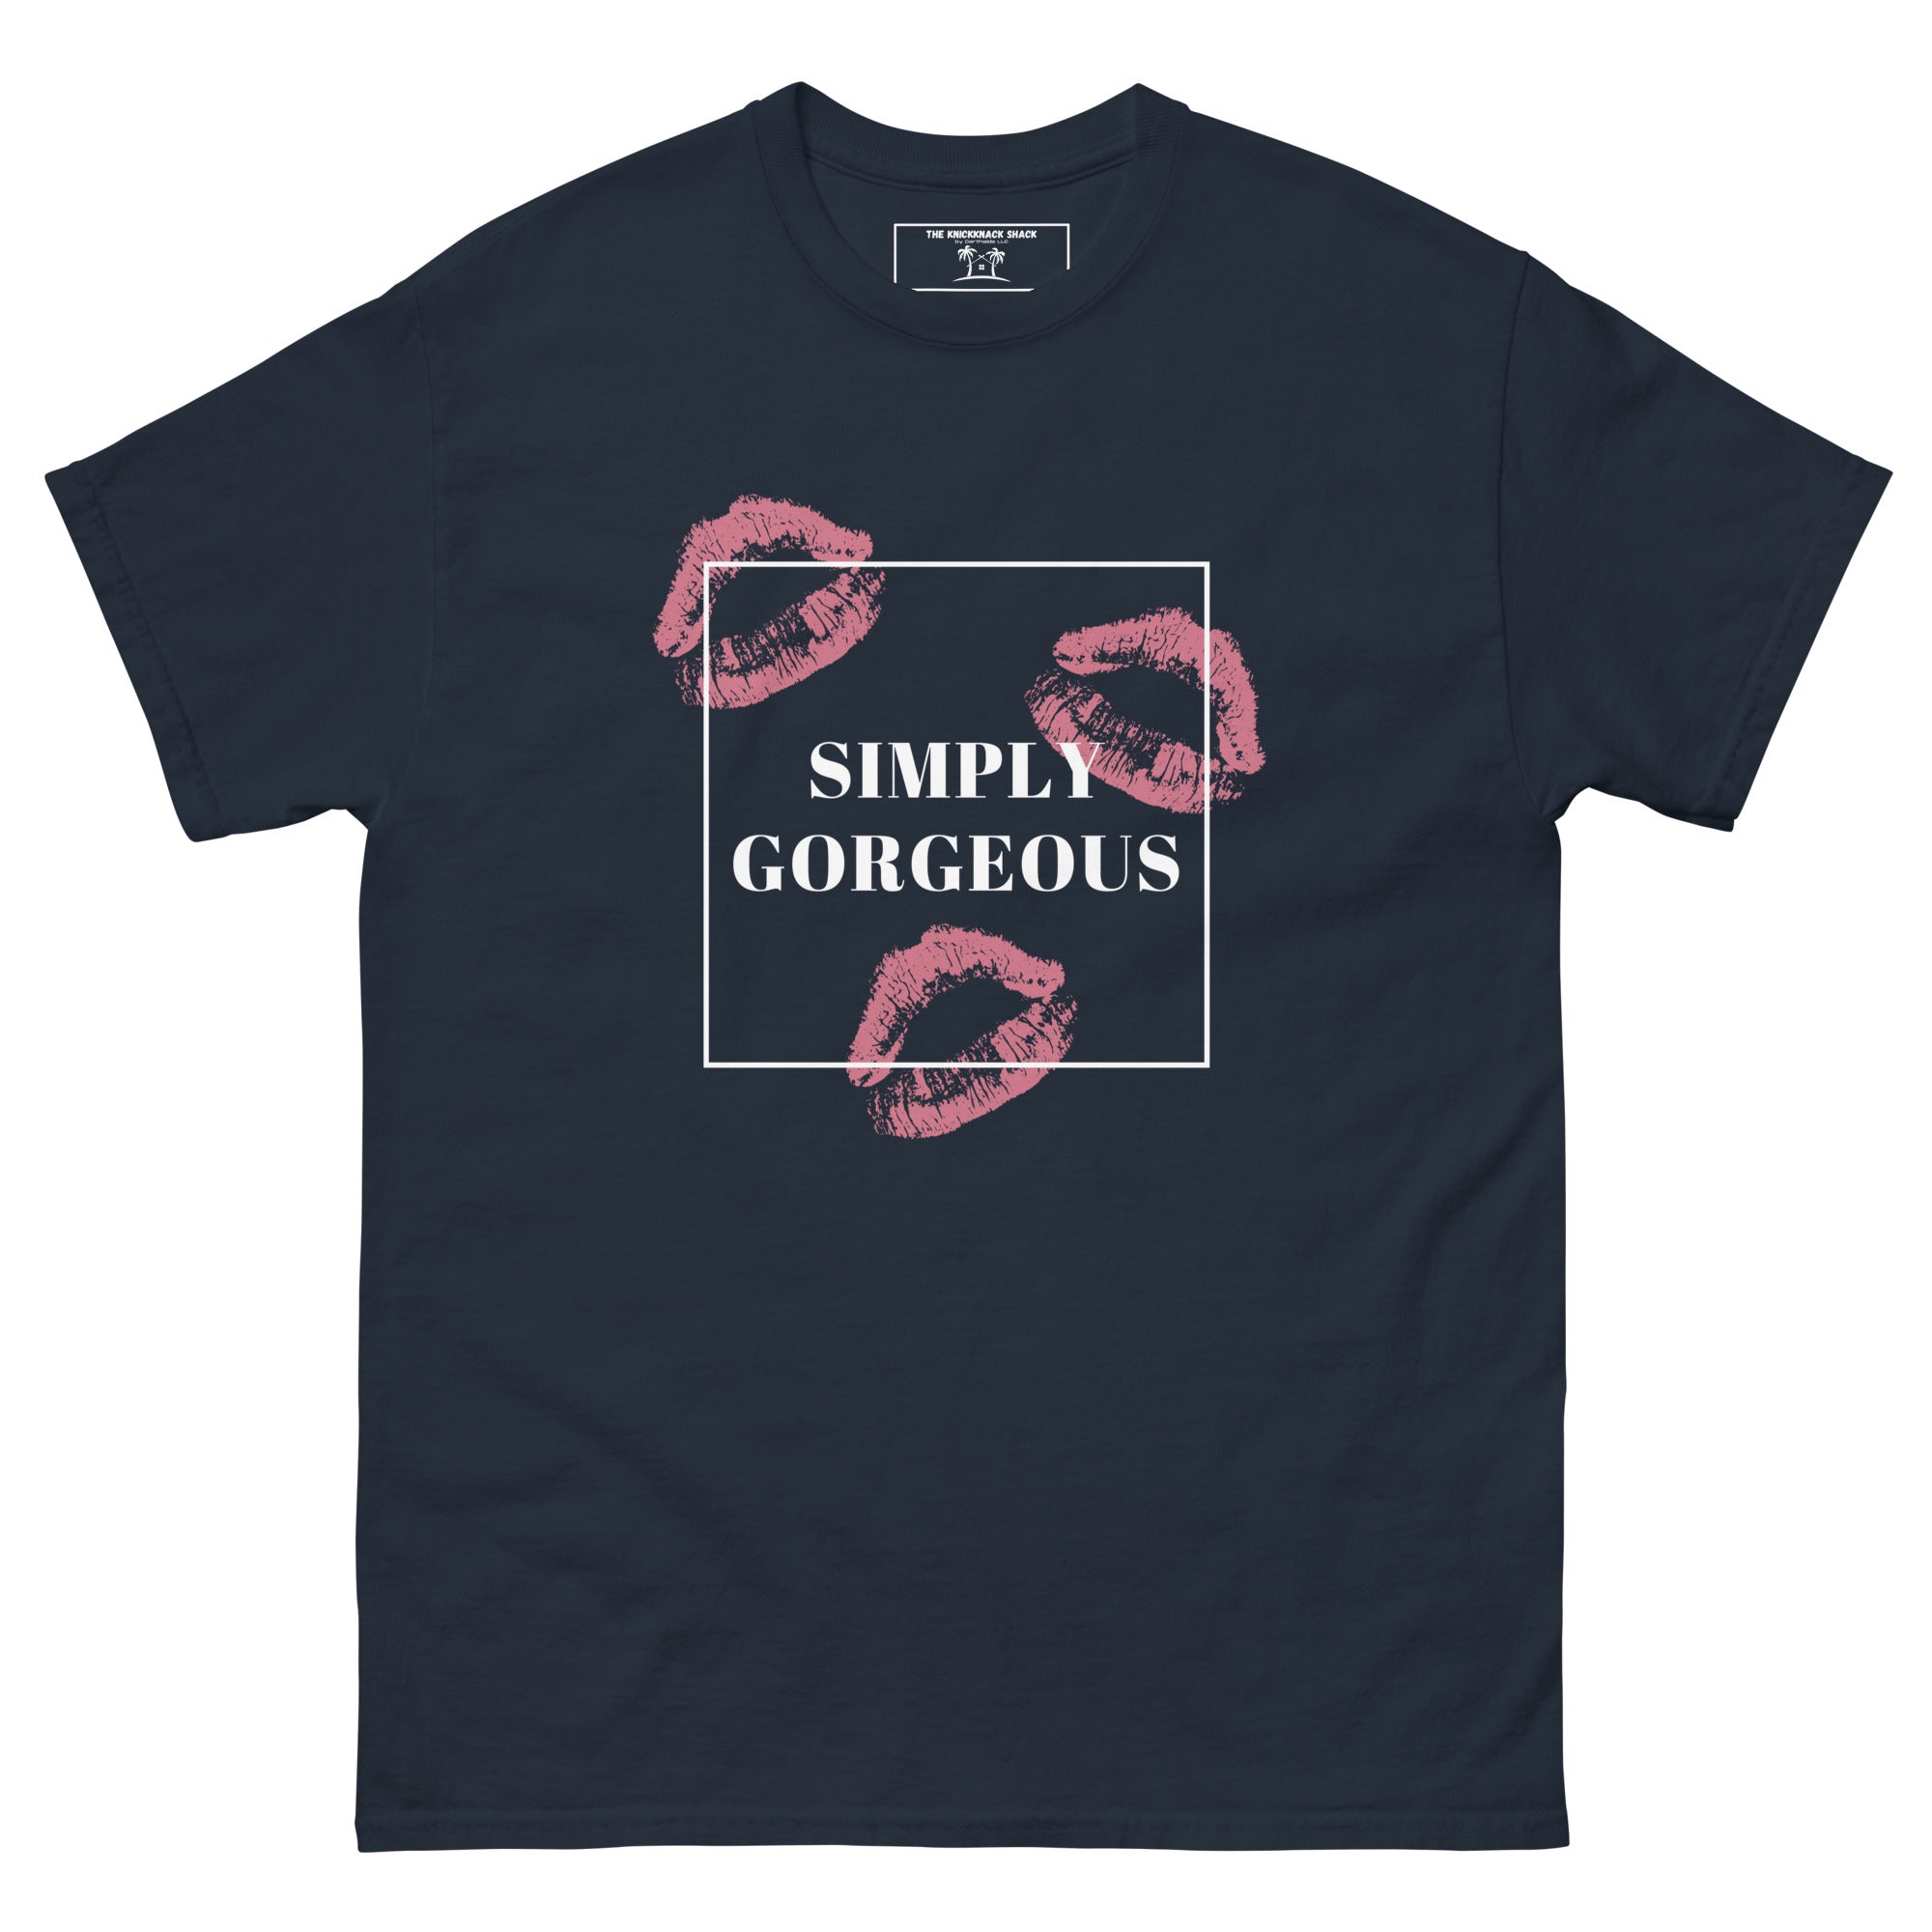 Classic Tee - Simply Gorgeous (Dark Colors)